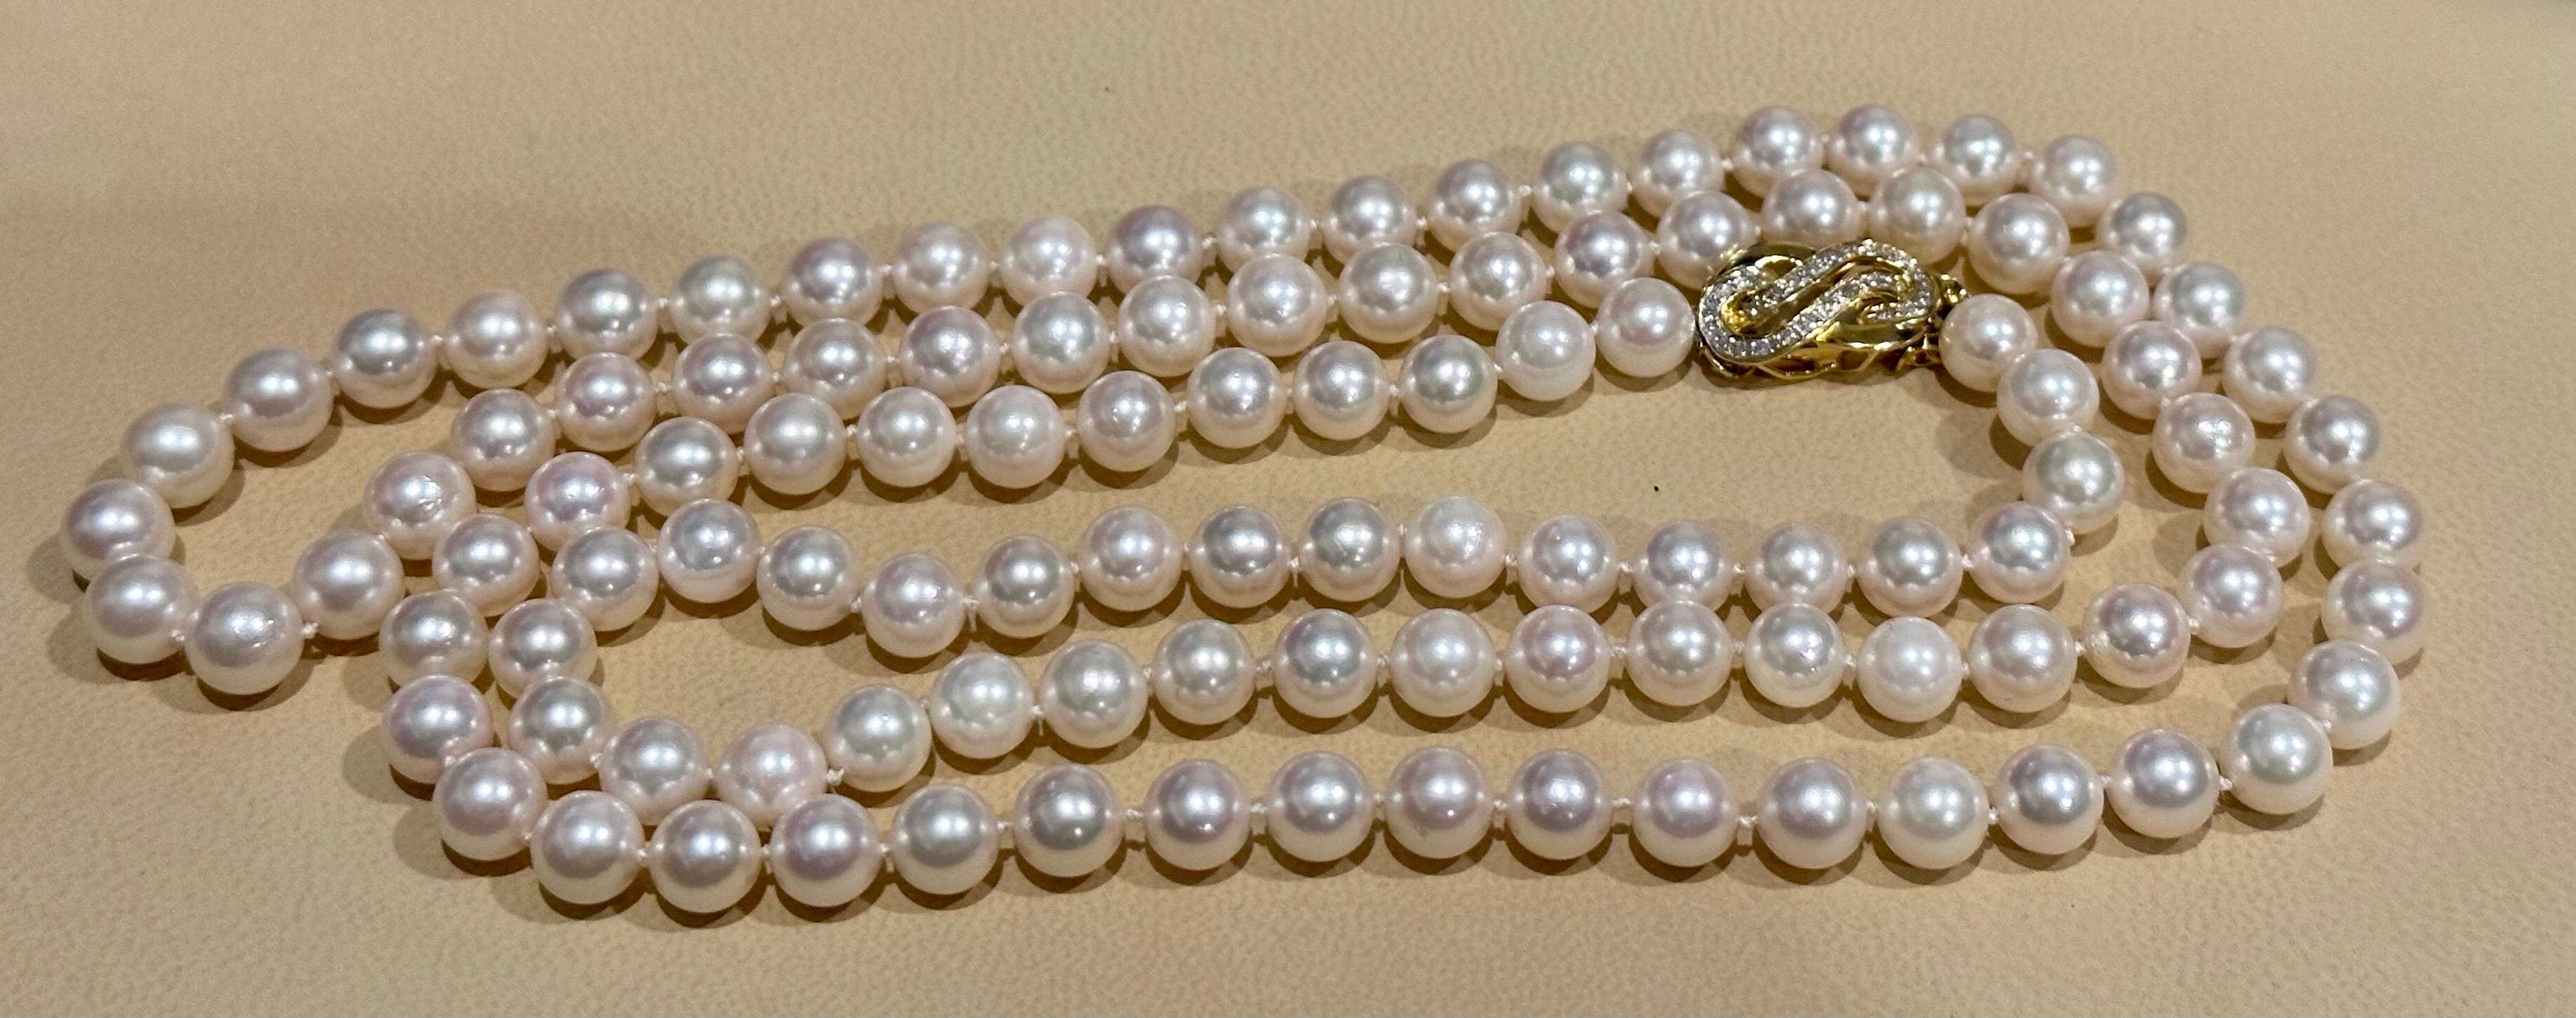 Women's Vintage Cultured Akoya Pearl Strand Necklace Opera Length with Diamond Clasp For Sale